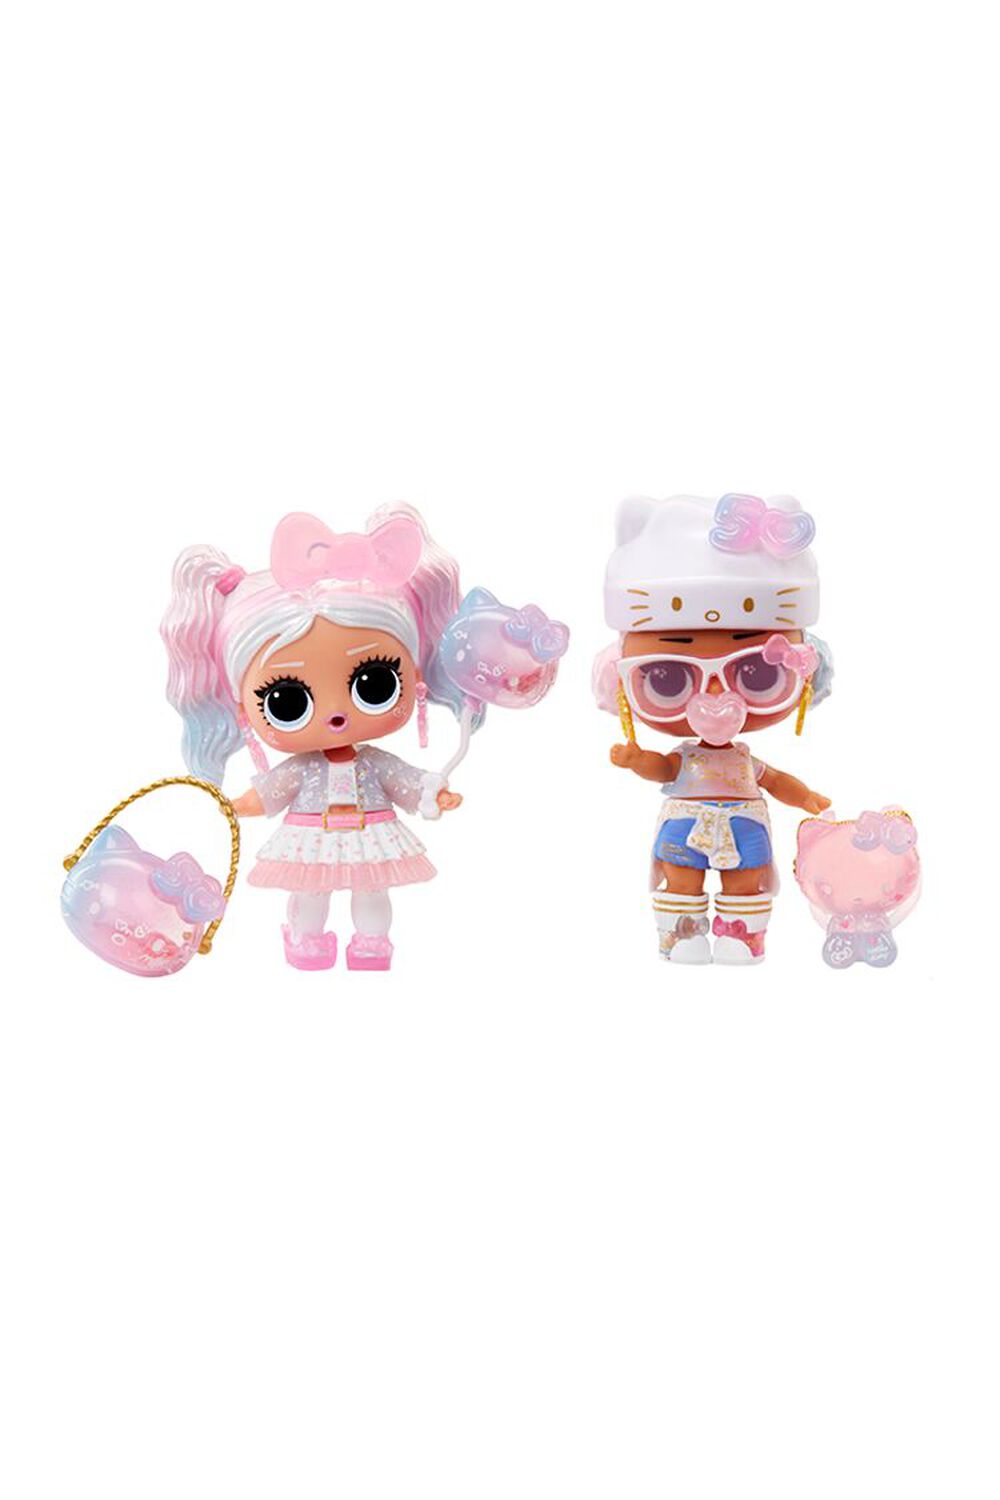 L.O.L. Surprise! Loves Hello Kitty Miss Pearly Doll